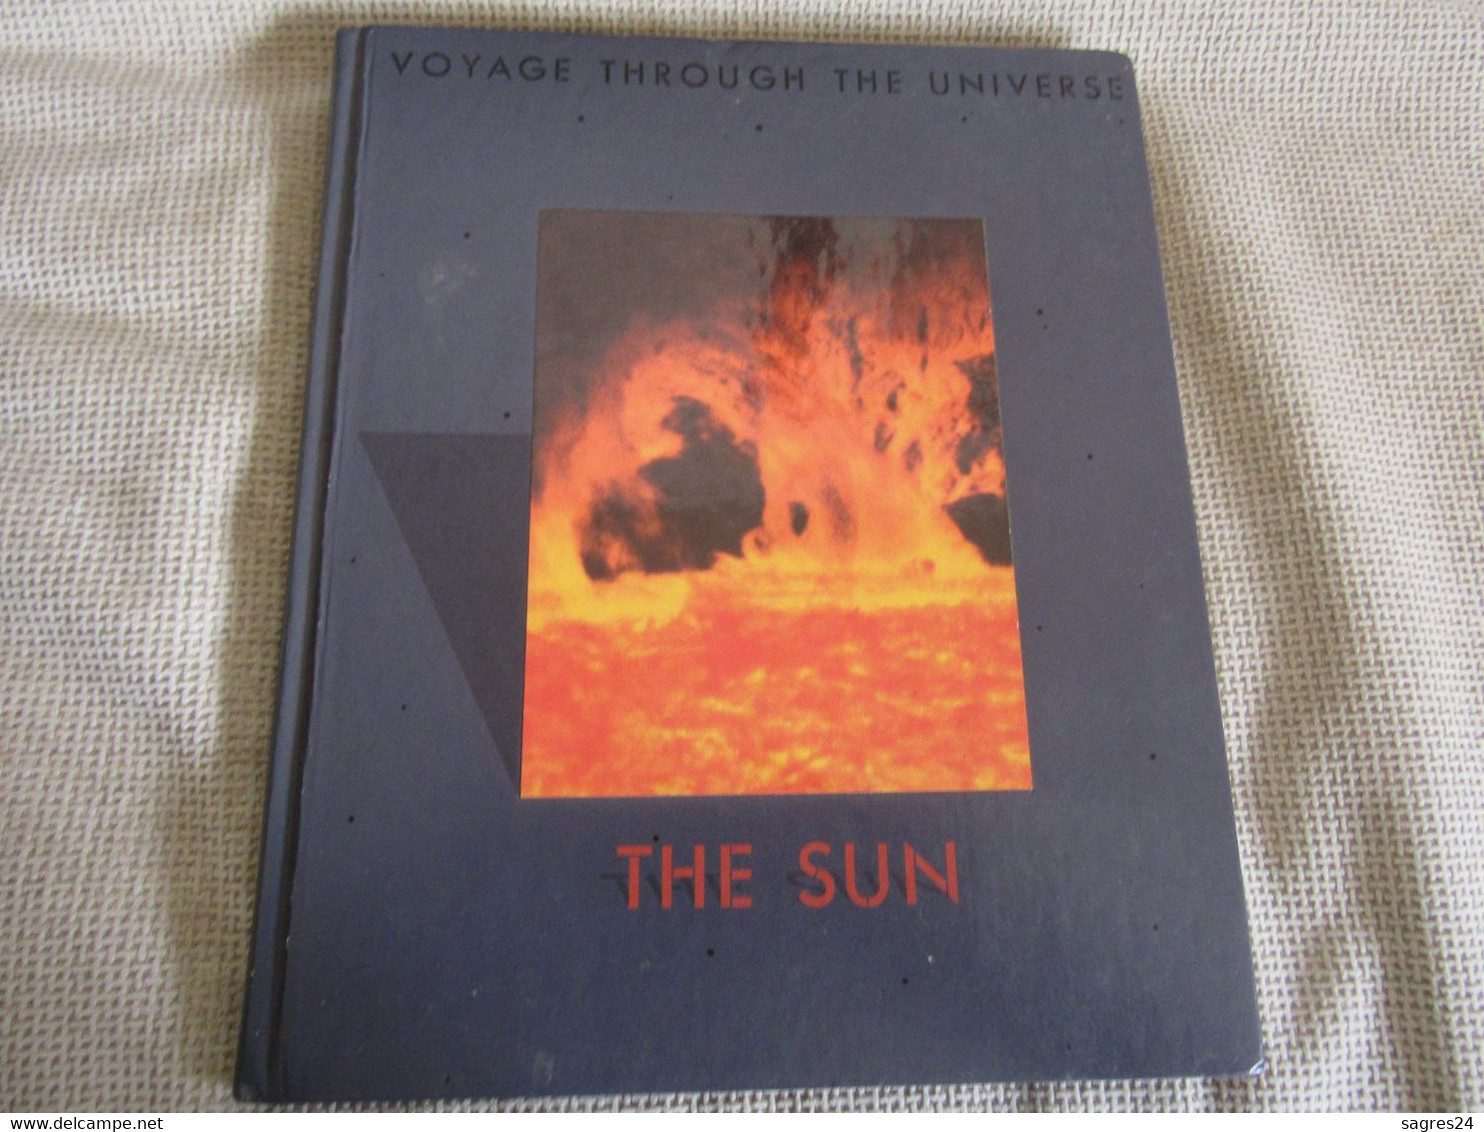 Voyage Through The Universe - The Sun - Time-Life Books - Sterrenkunde